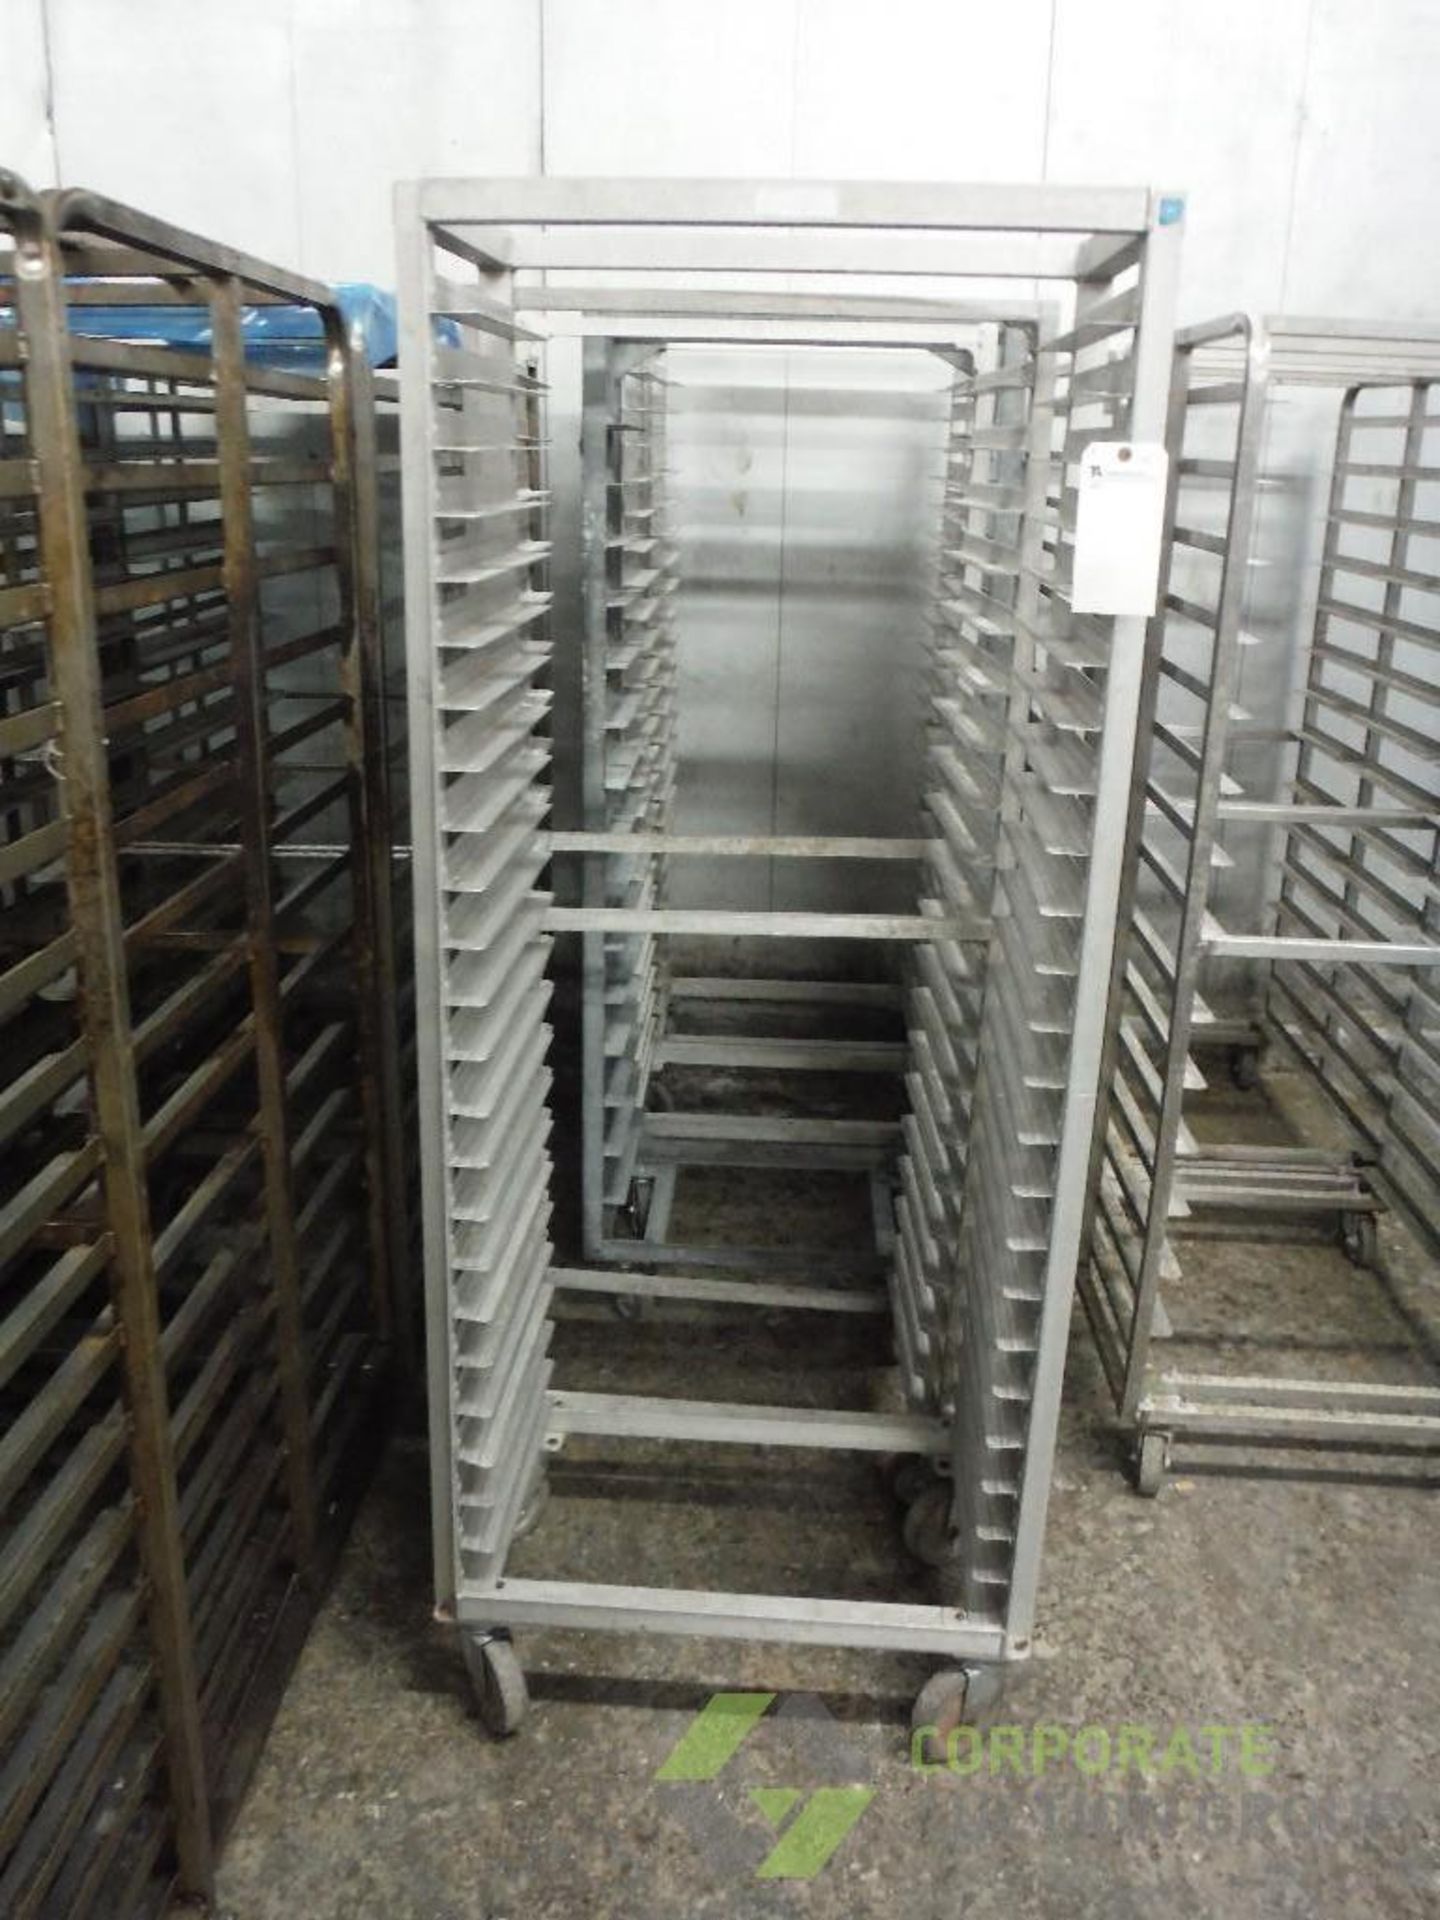 (5) bakery racks, 18 in. long x 26 in. wide x 70 in. tall, on casters (LOT) - Image 2 of 2